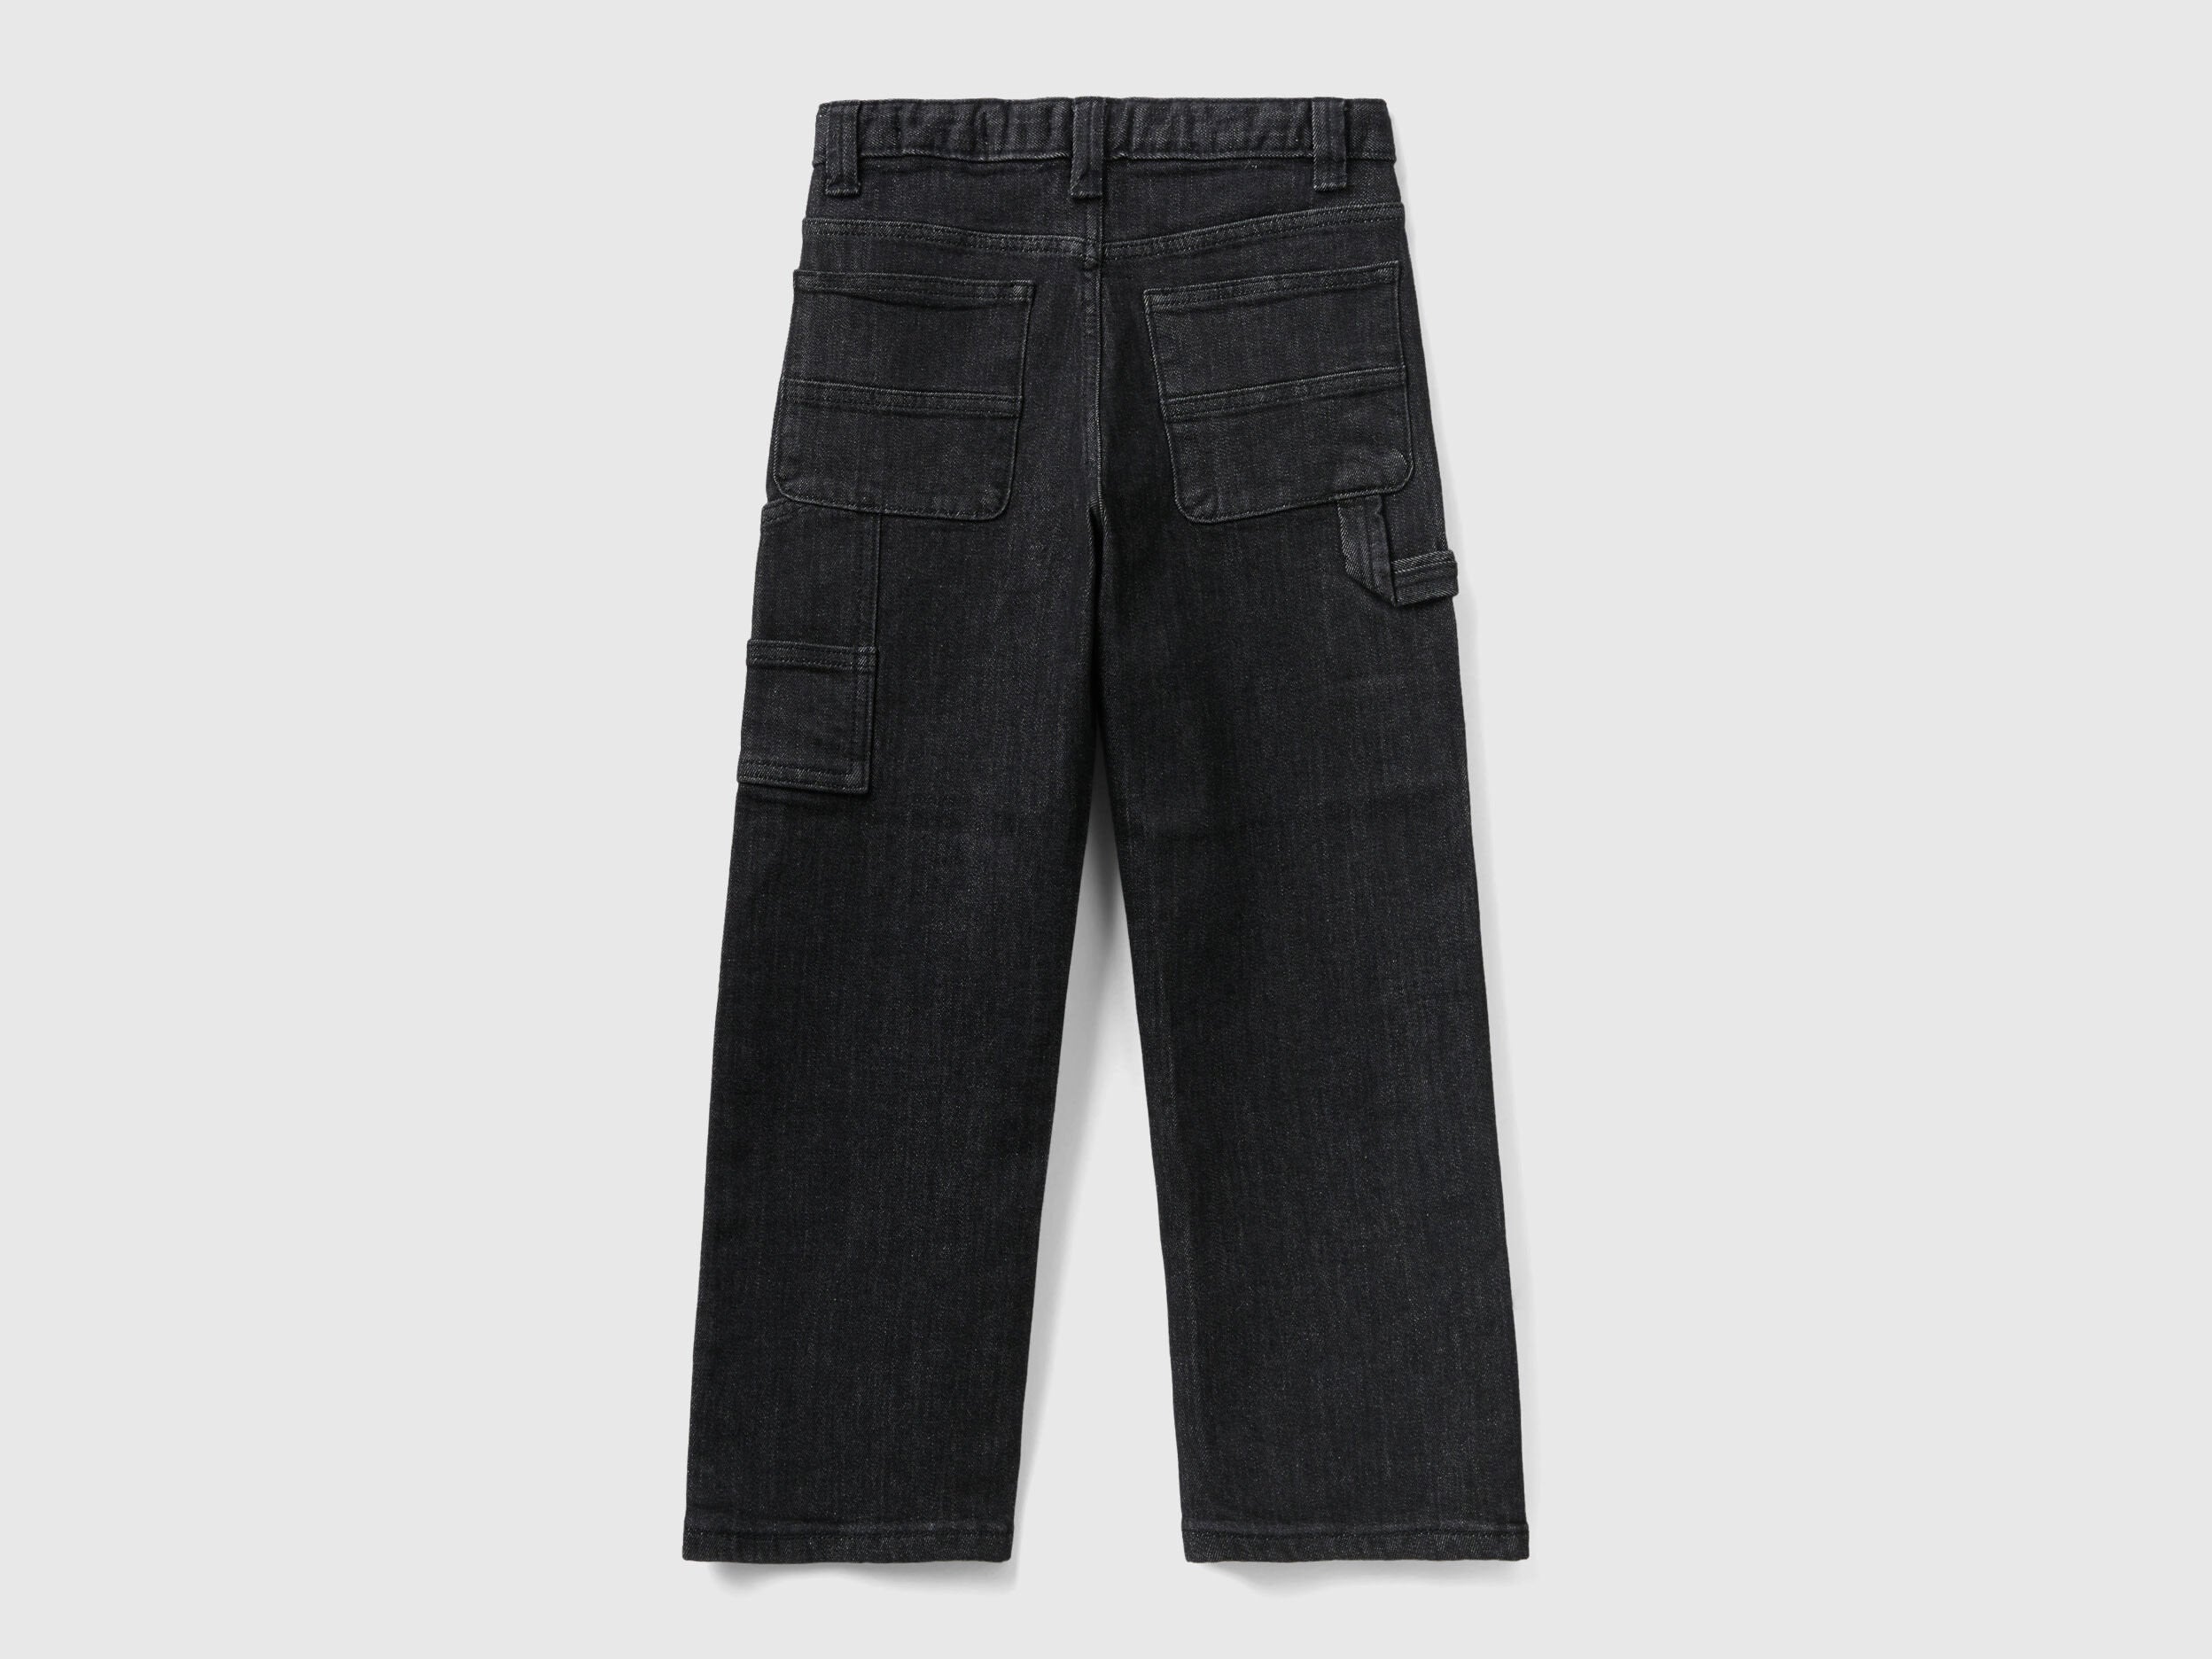 Worker Style Jeans_4EJVCF02F_700_02